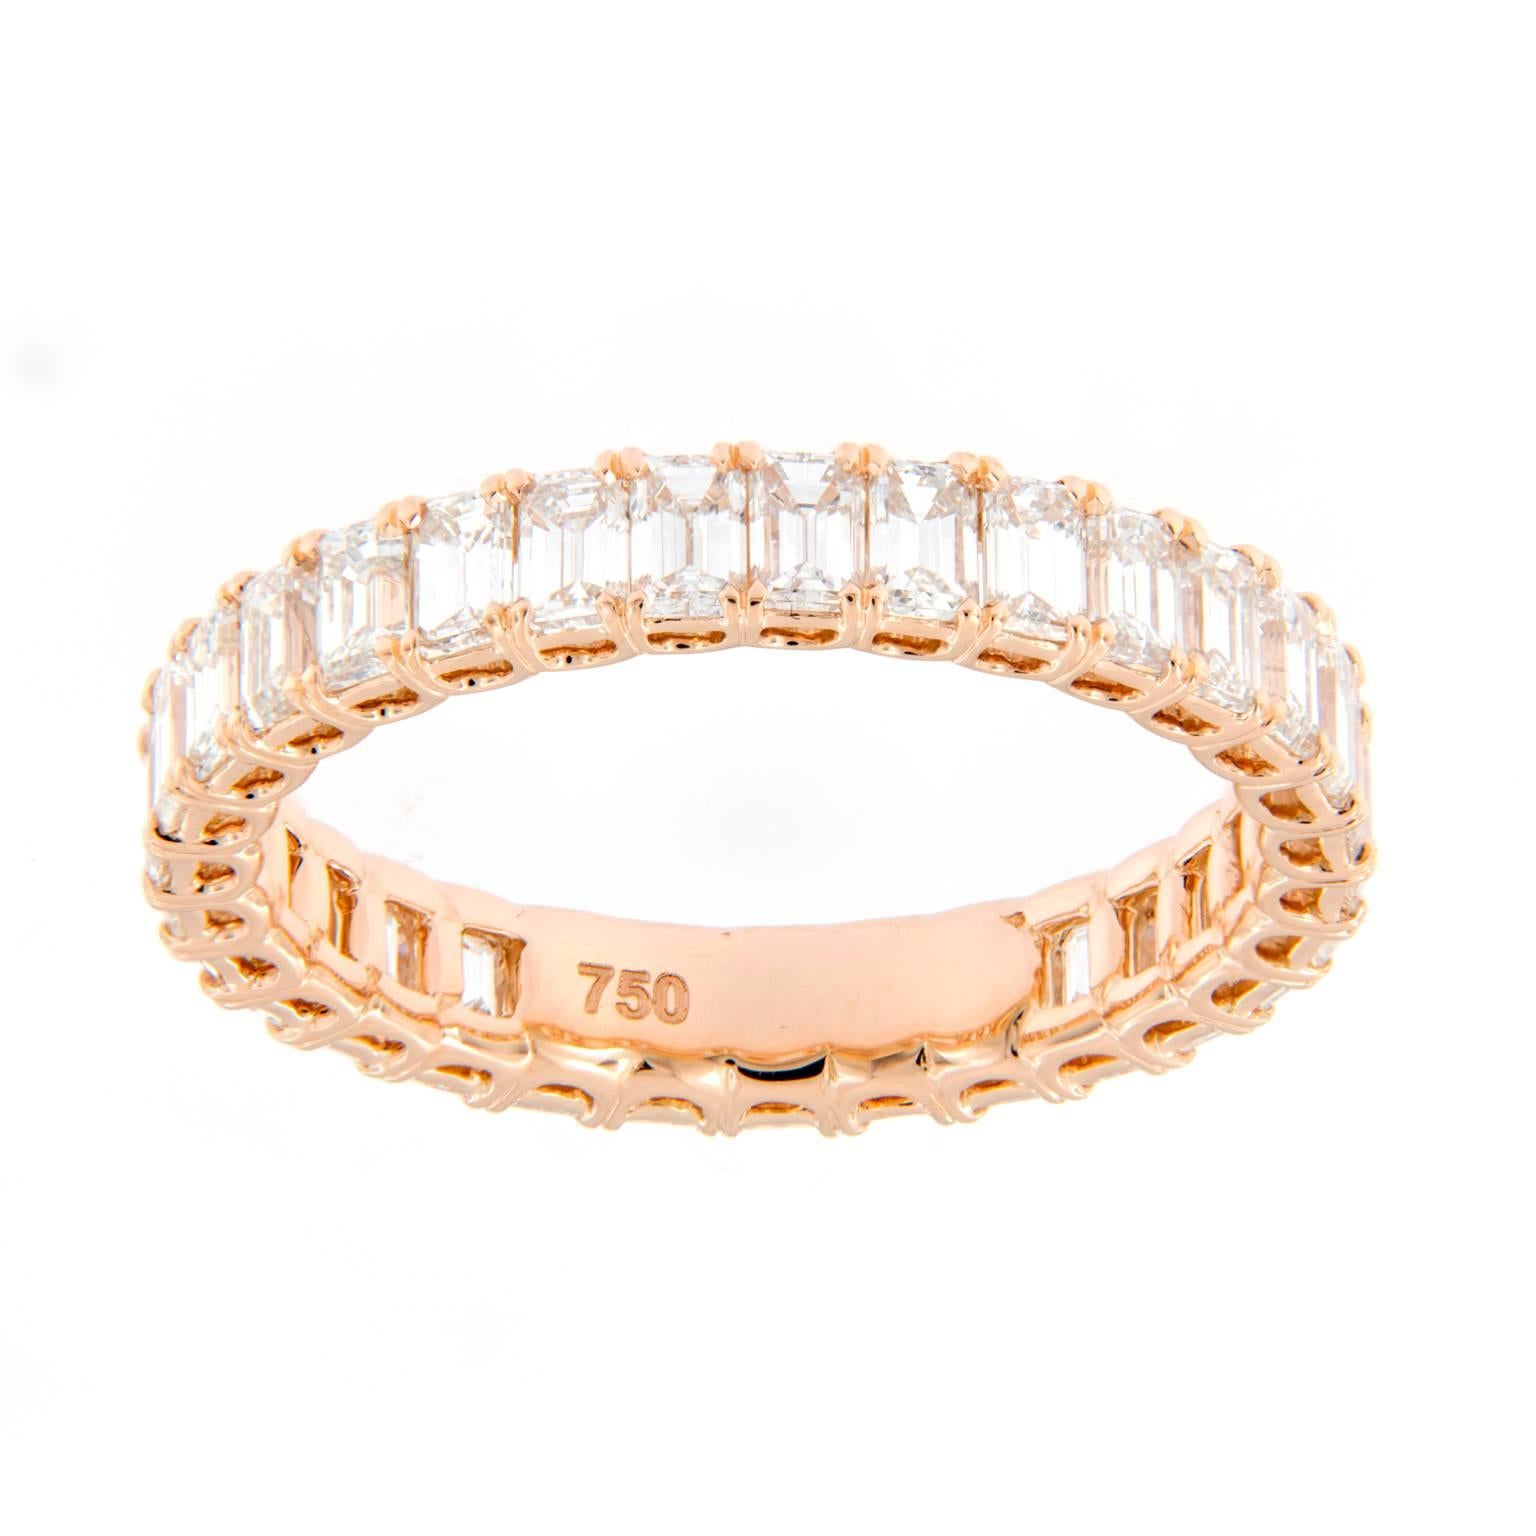 This stunning band features 31 baguette cut diamonds beautifully crafted in 18k rose gold. Ring size 6. Weighs 2.8 grams.

Diamond 2.66 cttw